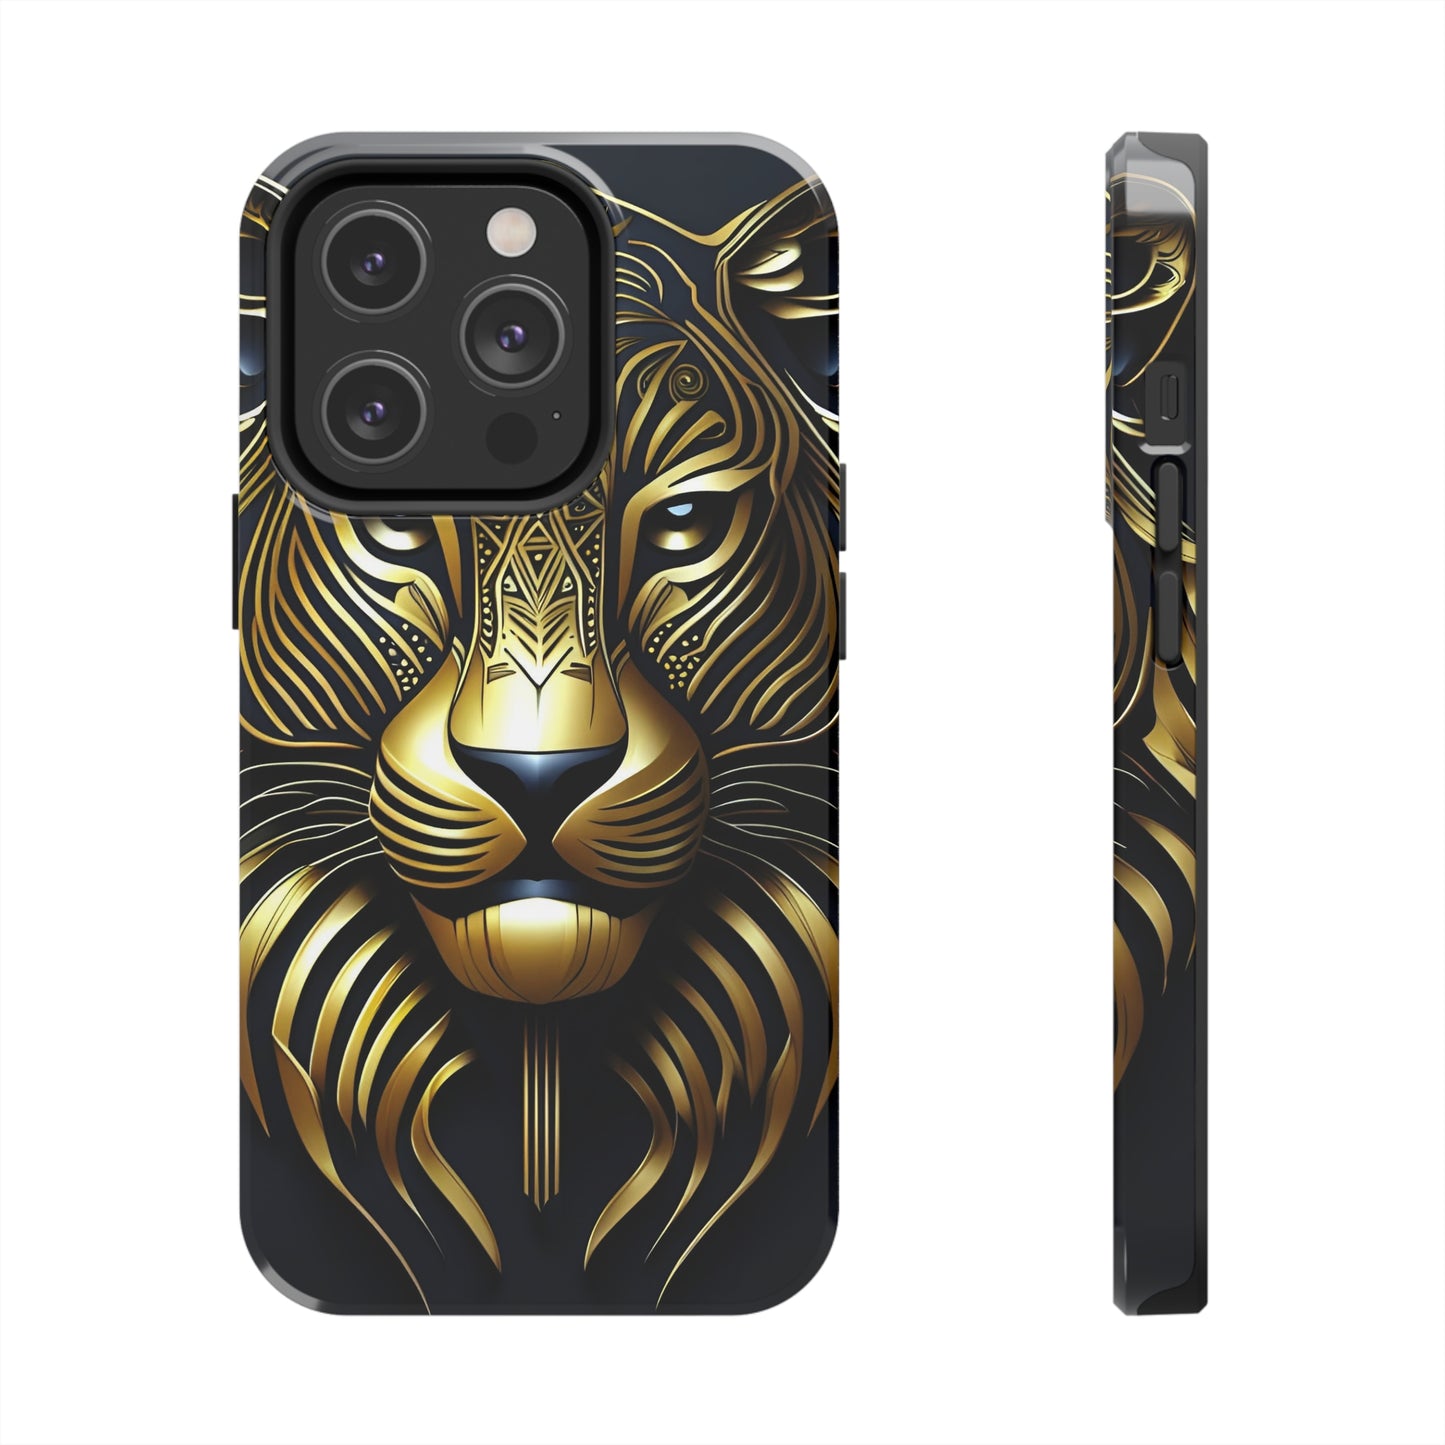 Tough Phone Case for iPhone 14 - Blue and Gold Tribal Tiger Head Art Deco Style Printed on Phone Case for iPhone 14 Pro